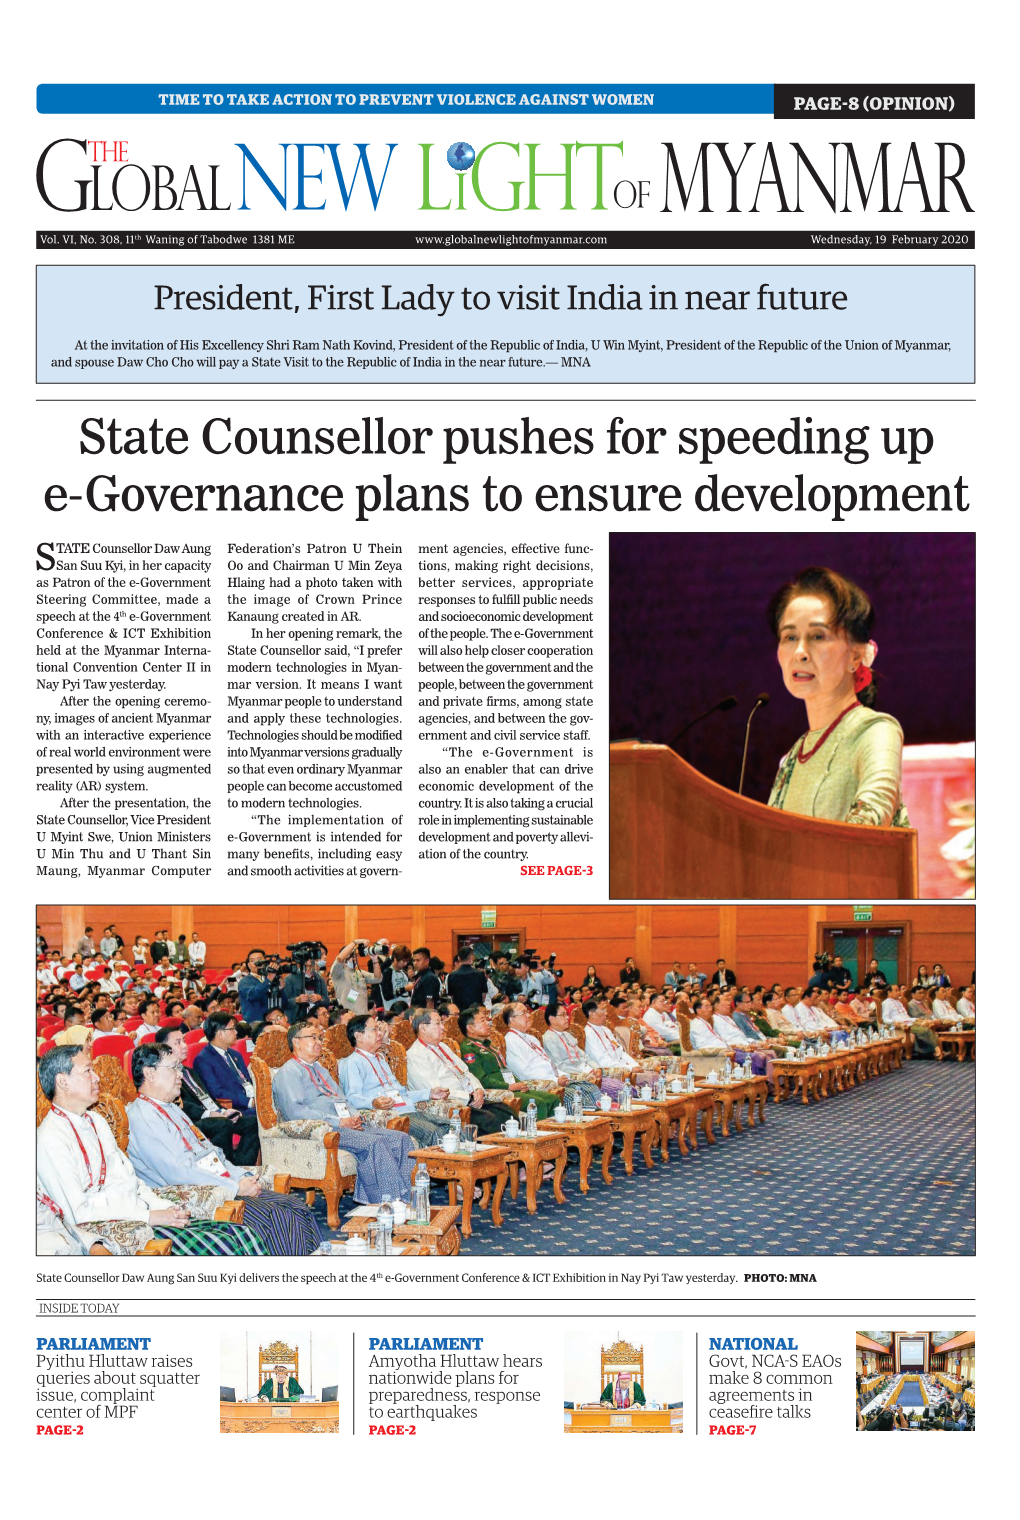 State Counsellor Pushes for Speeding up E-Governance Plans to Ensure Development